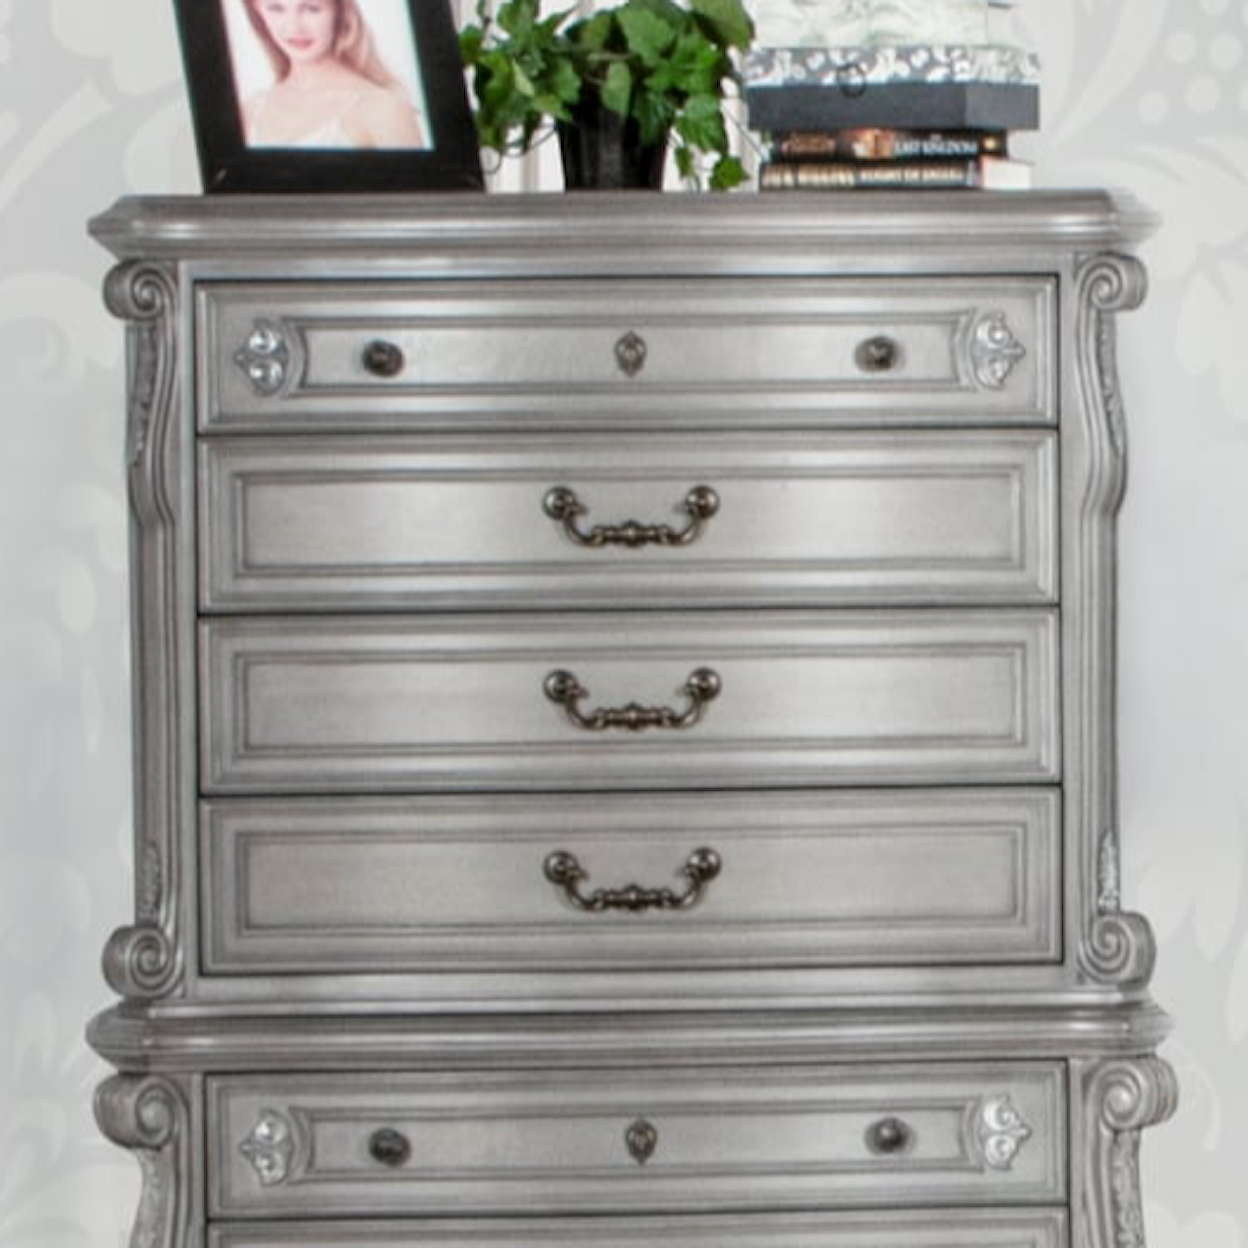 New Classic Bianello Bachelor Chest Top